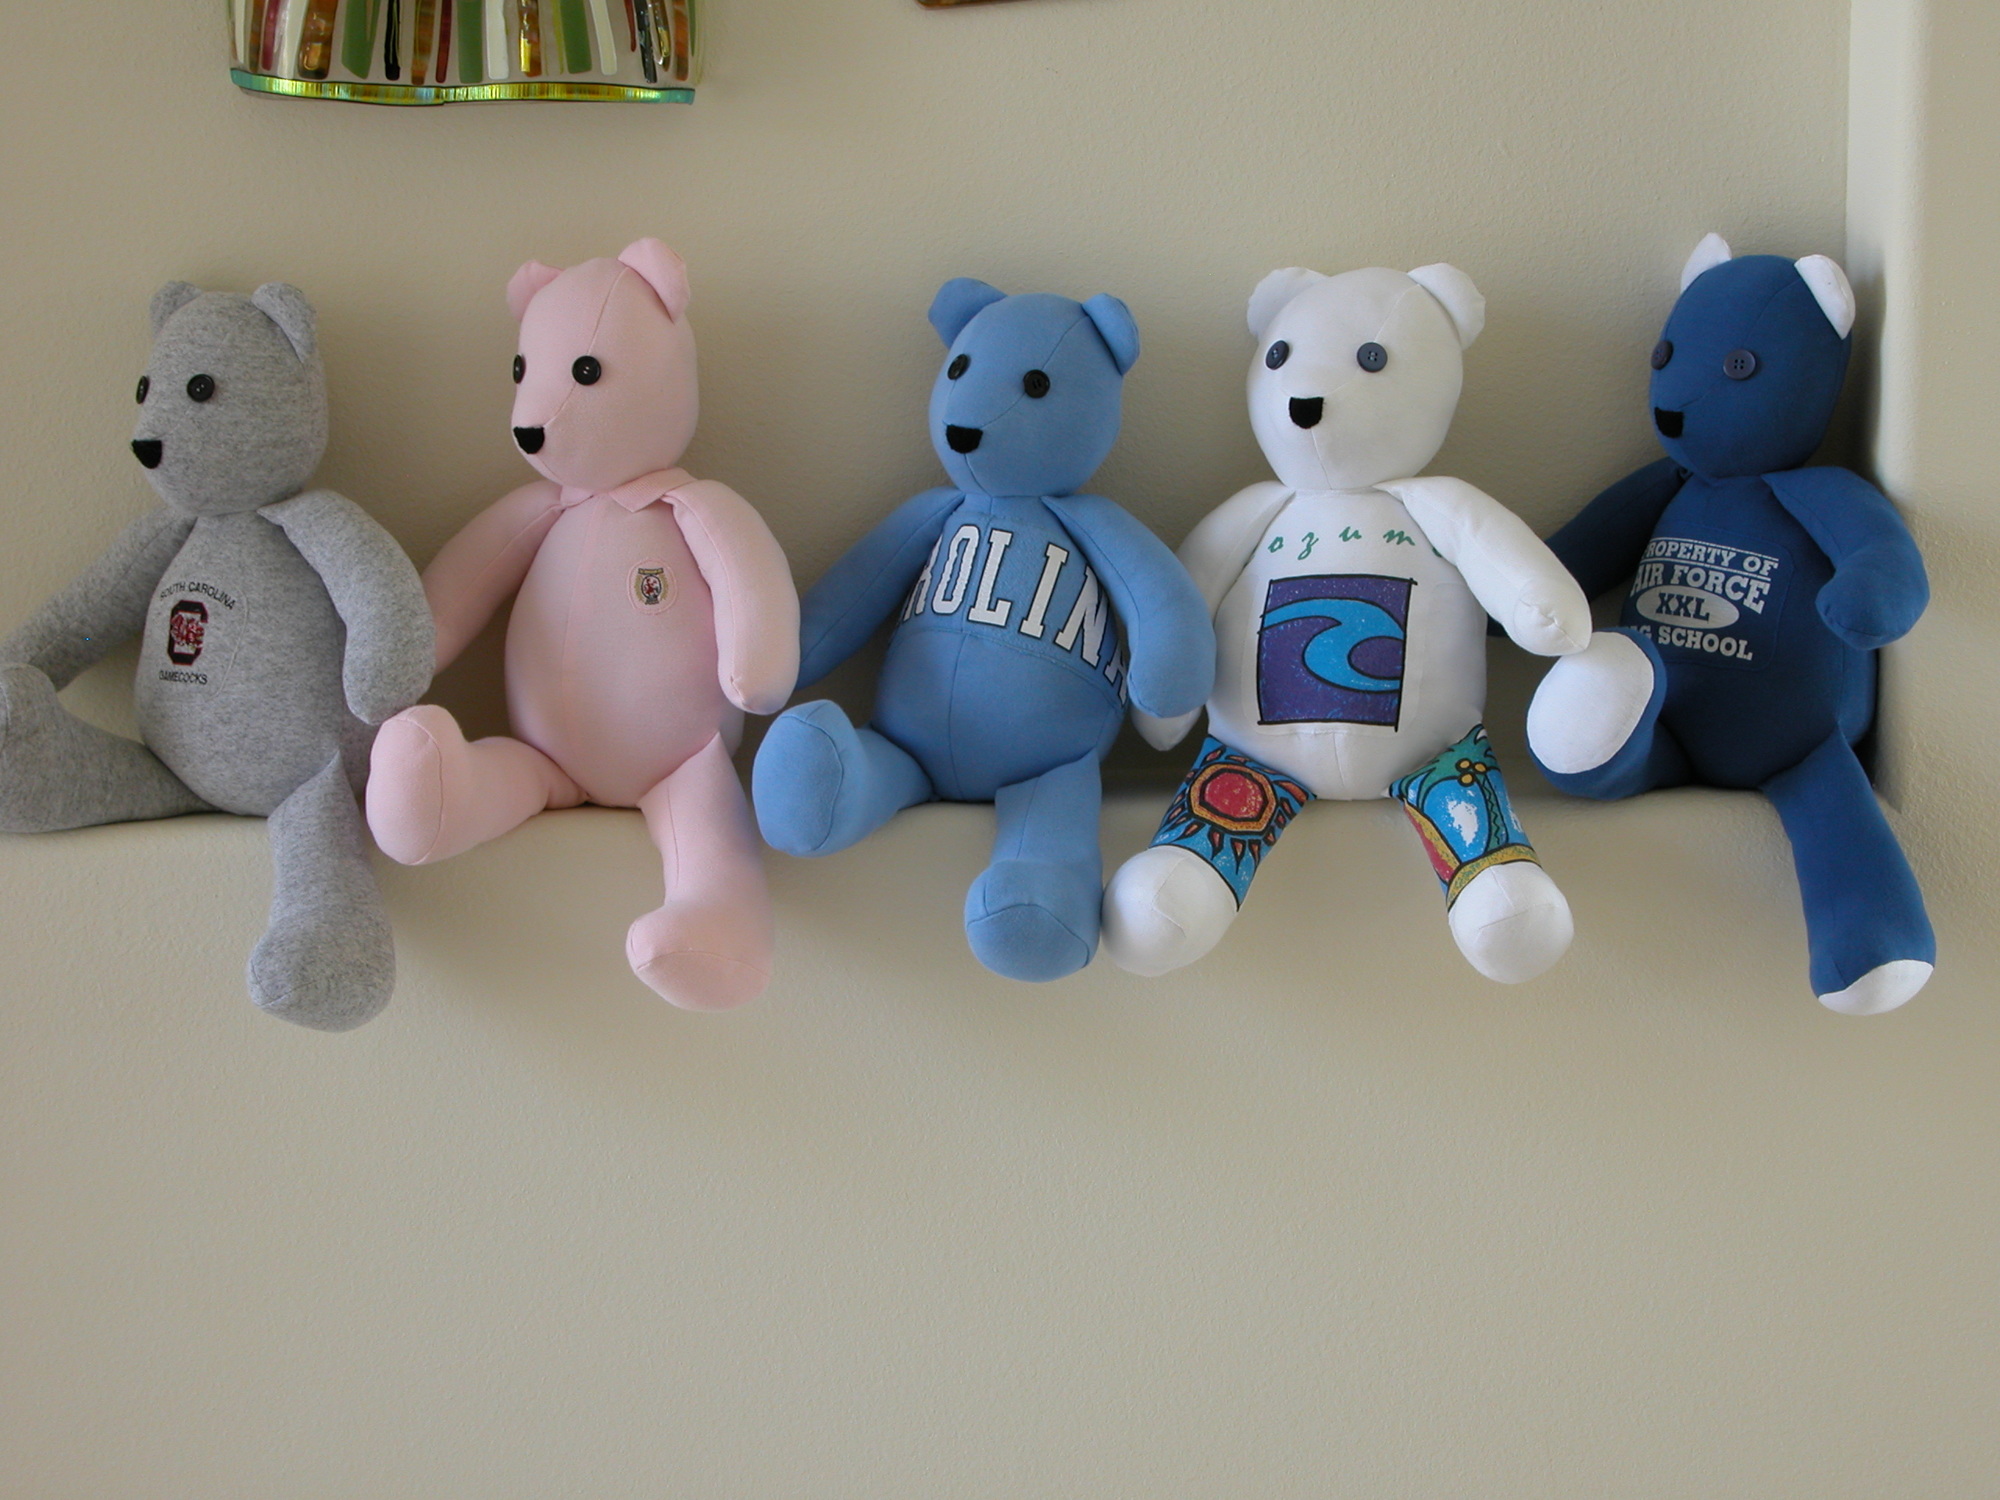 Memory bears sit on a shelf ready to be delivered. Courtesy photo